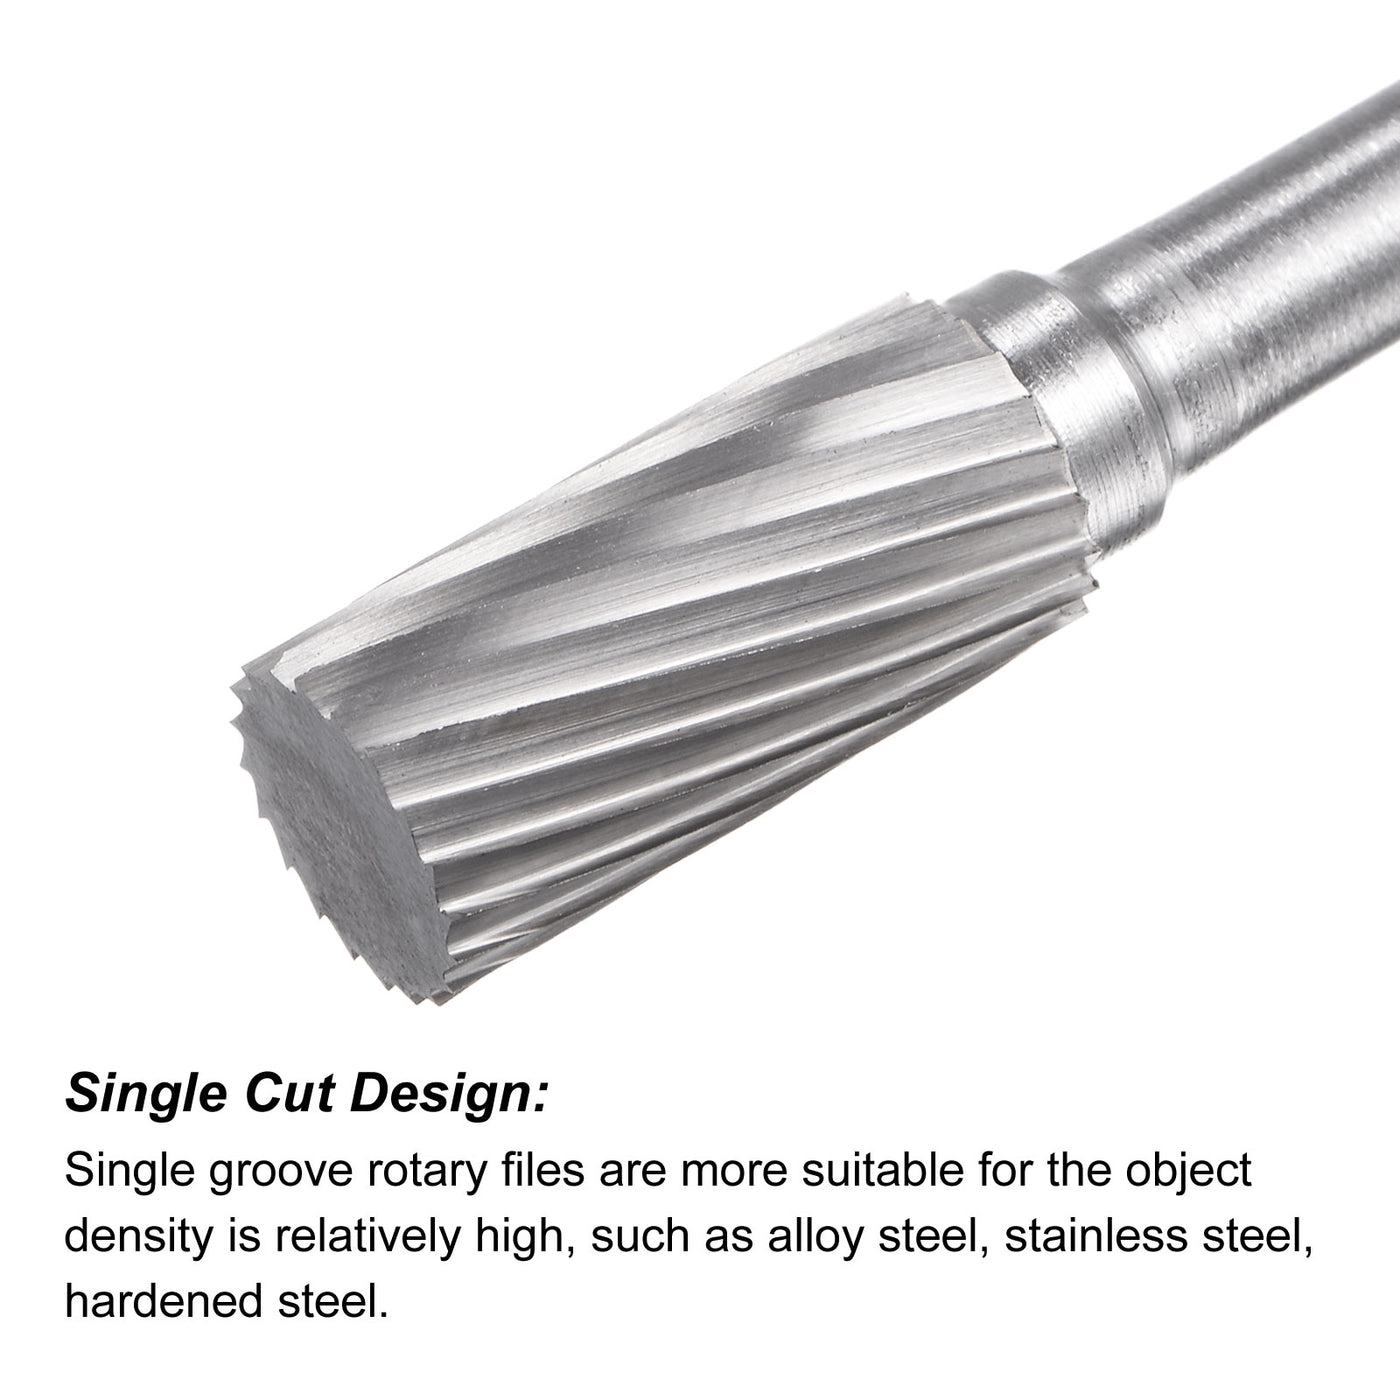 uxcell Uxcell 10mm x 150mm 6mm Shank Single Cut Cylinder Carbide Tip Rotary Files